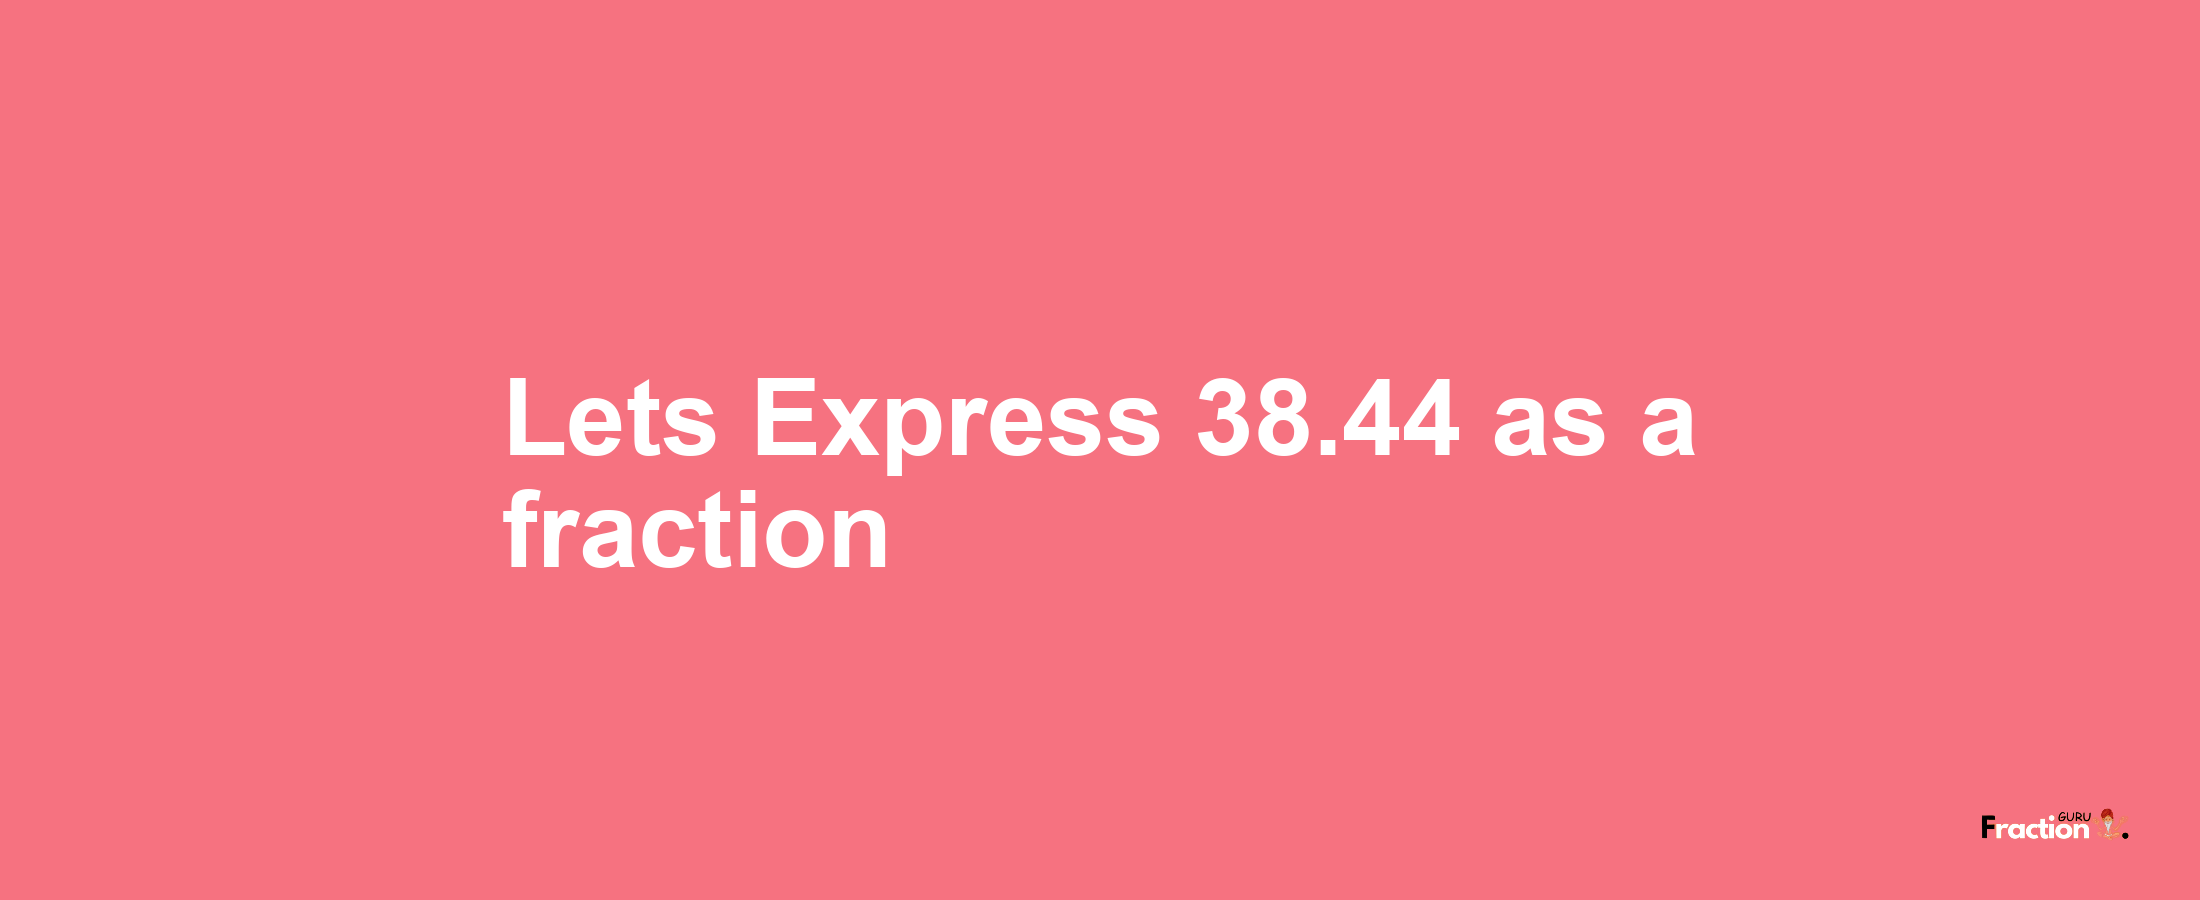 Lets Express 38.44 as afraction